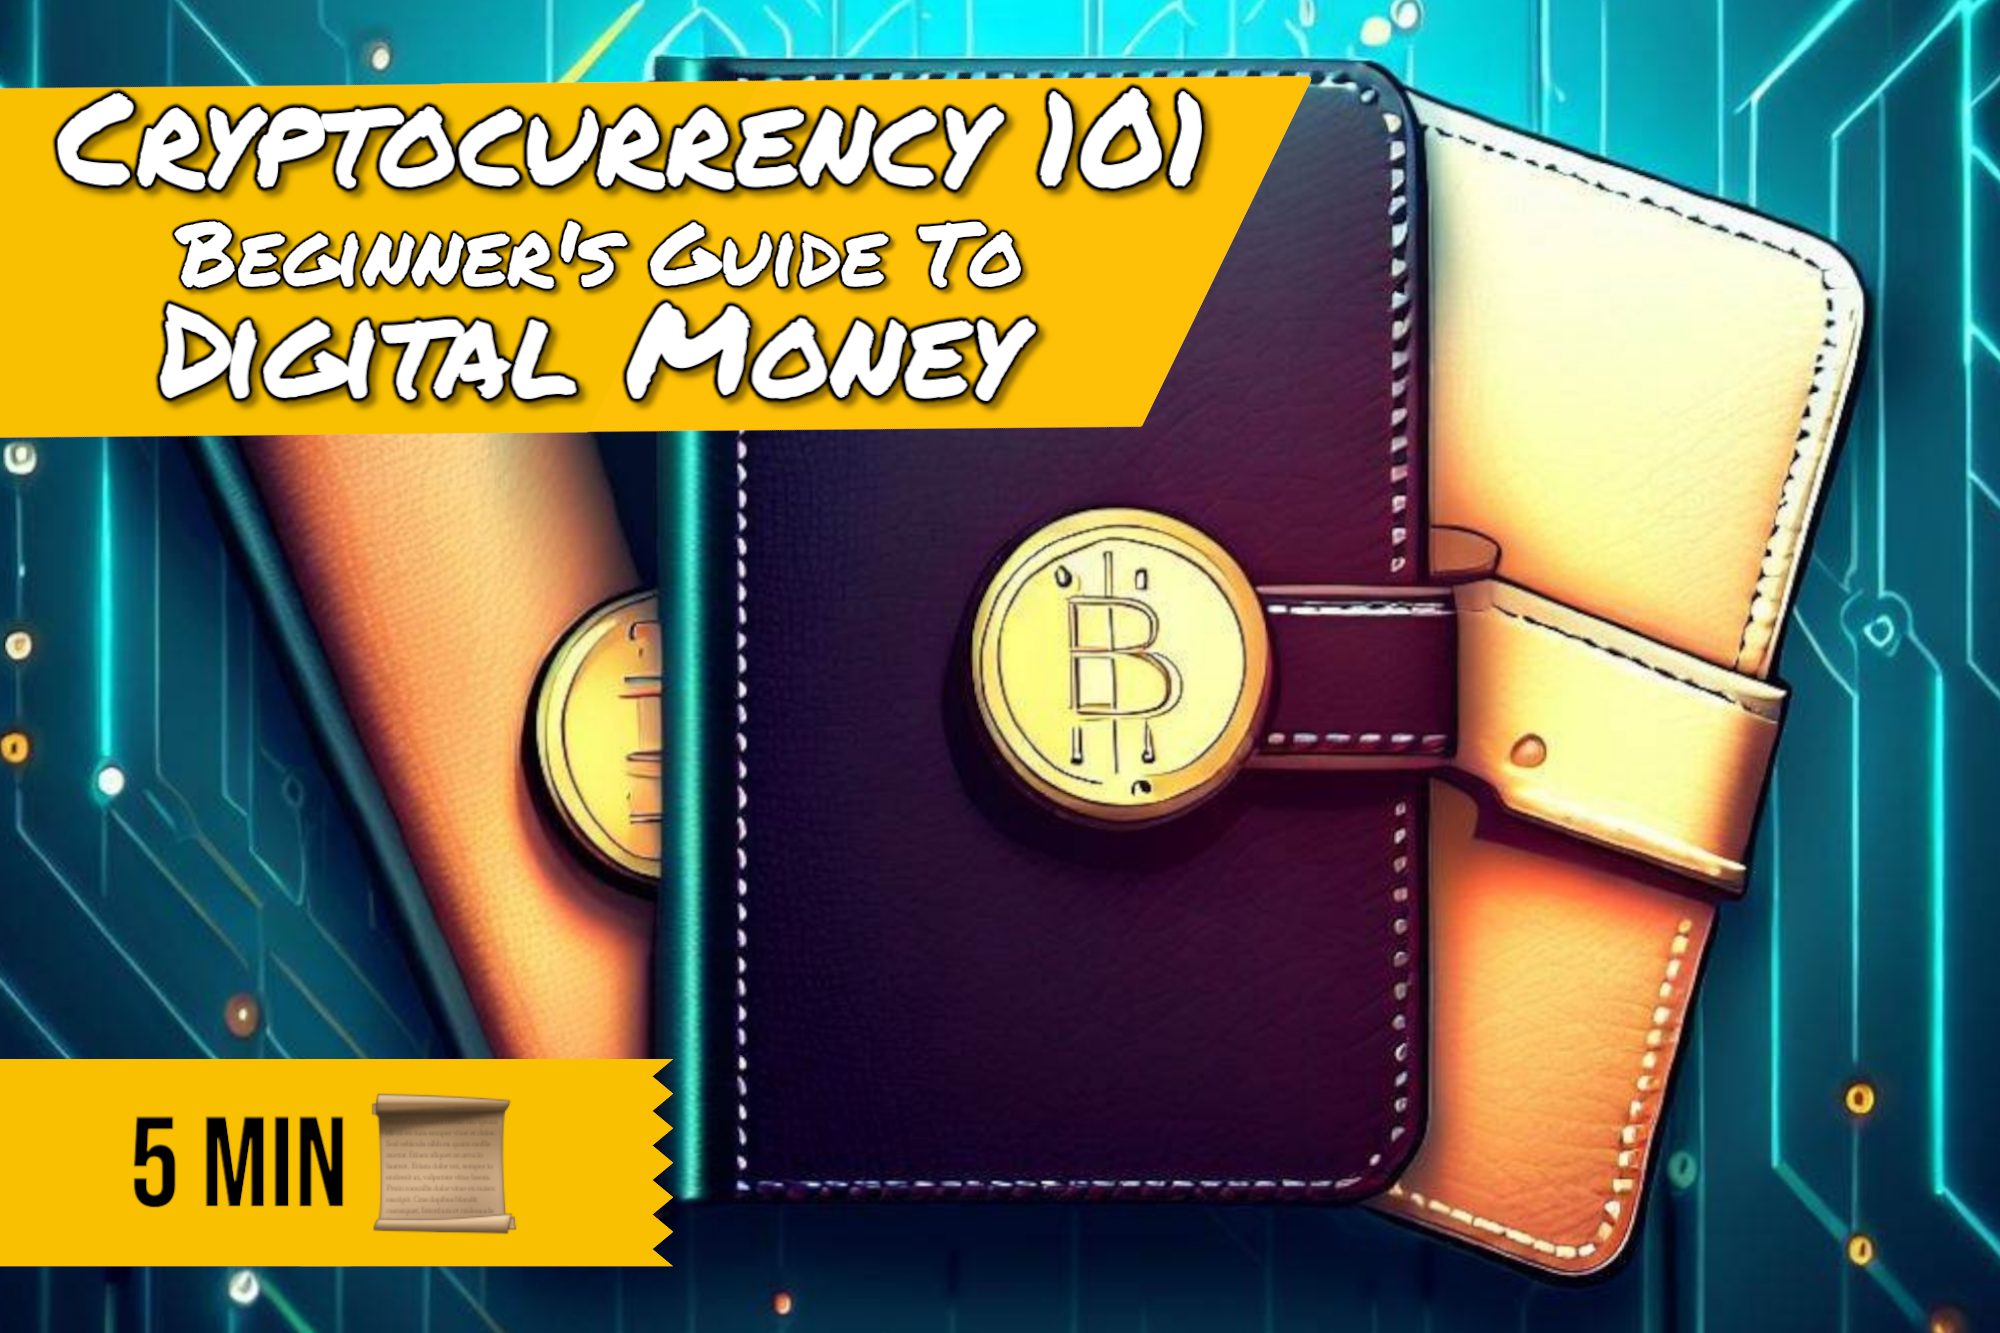 Cryptocurrency 101: A Beginner’s Guide to Digital Money